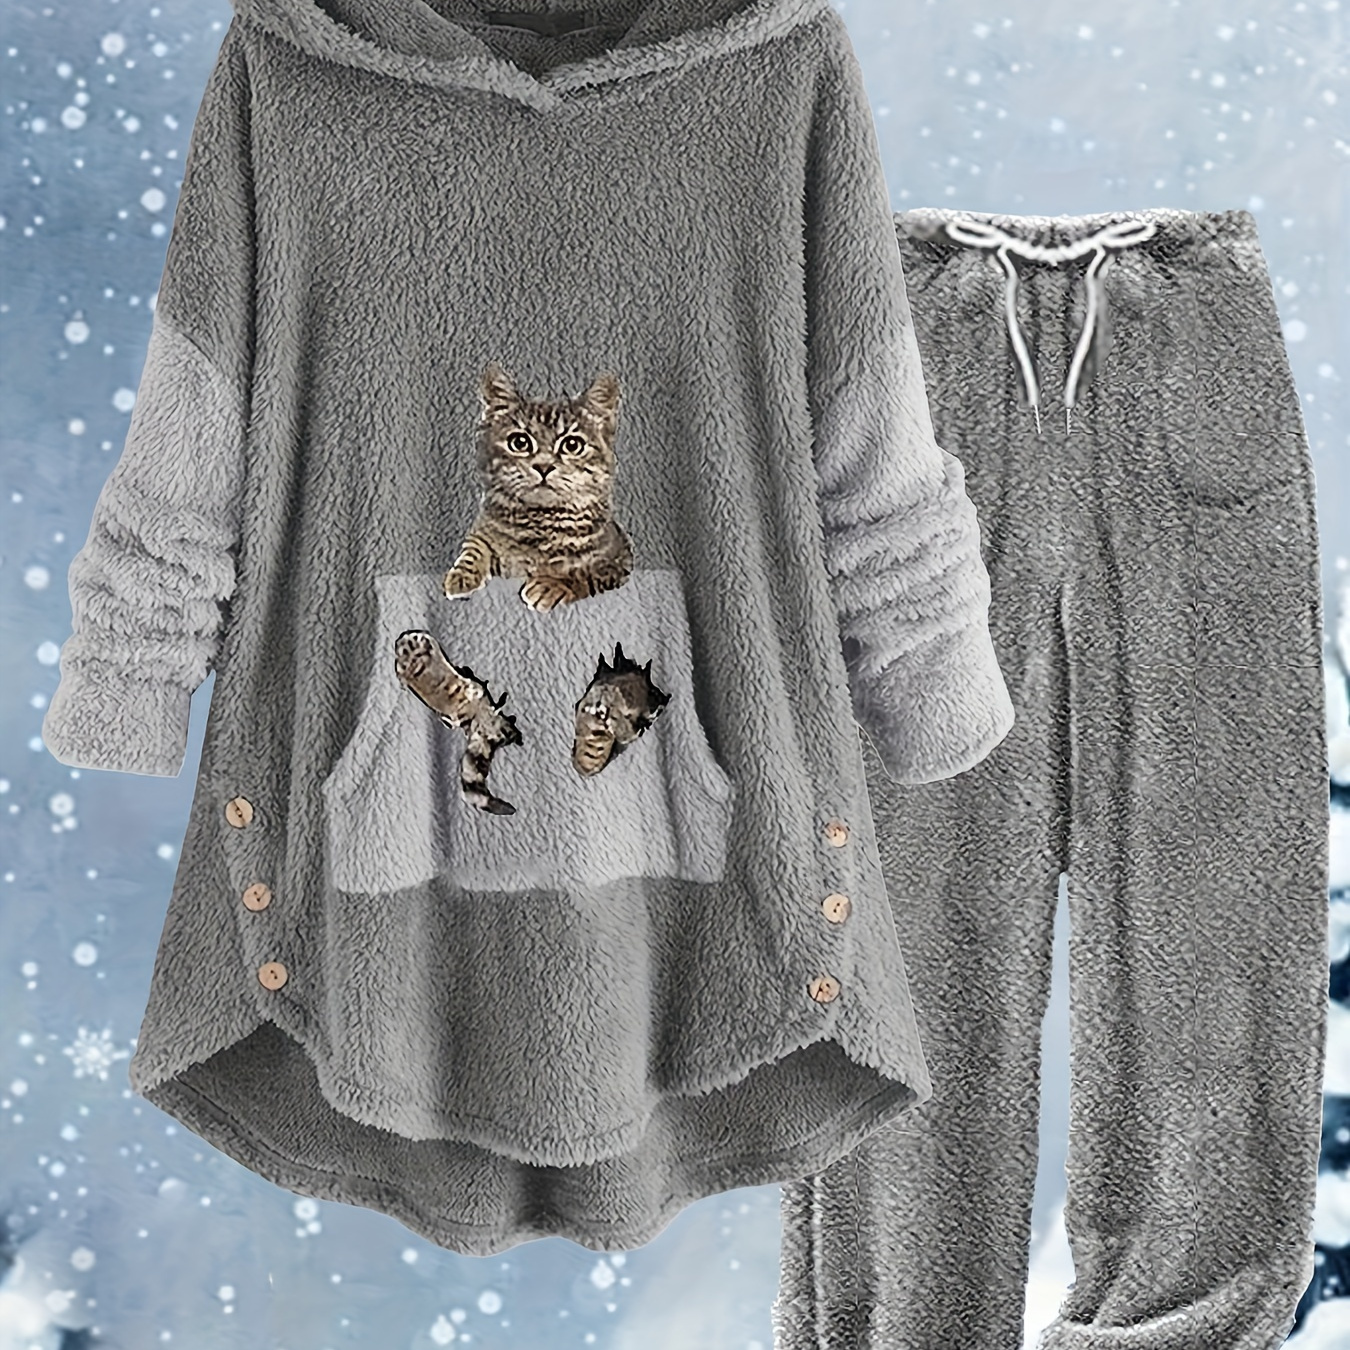 

Casual Teddy Two-piece Set, Cute Cat Pattern Hooded Tops & Drawstring Warm Pants Outfits, Women's Clothing